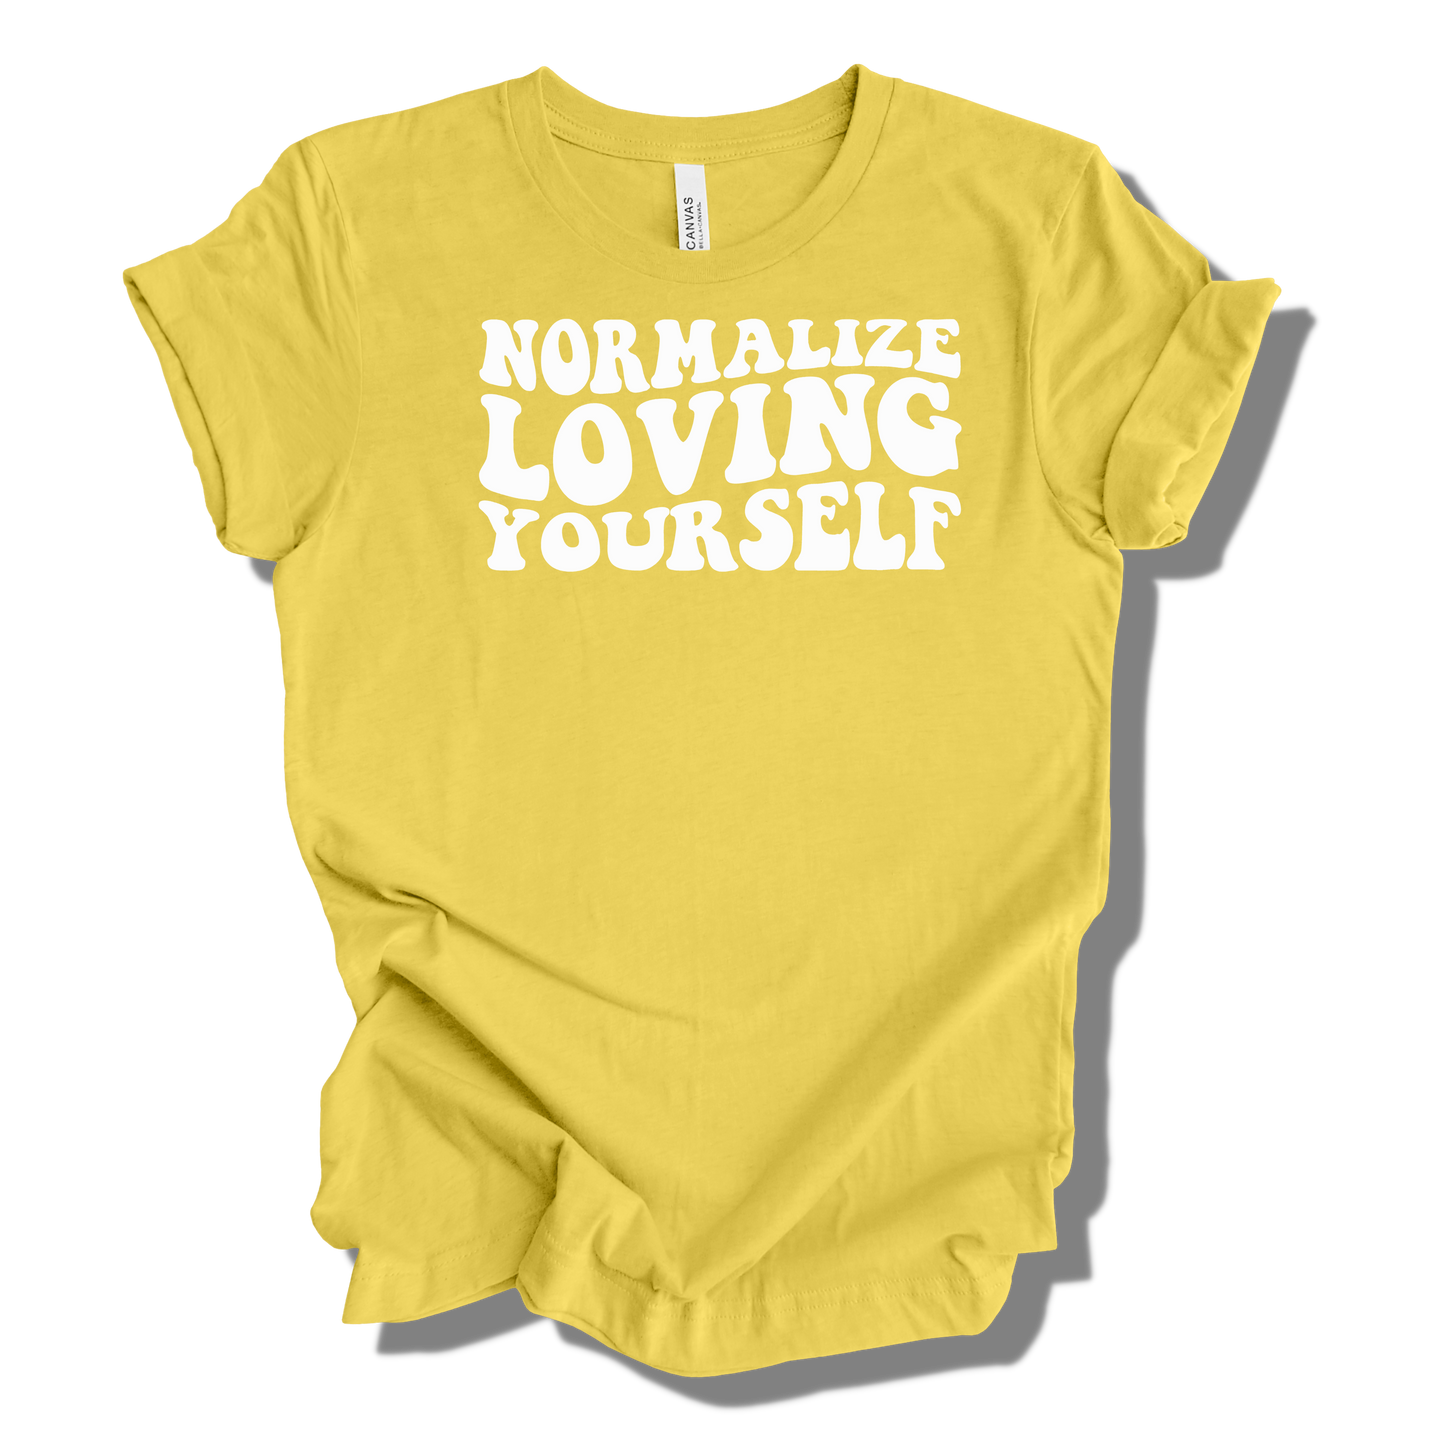 NORMALIZE LOVING YOURSELF T-SHIRT (WHITE WORDING)